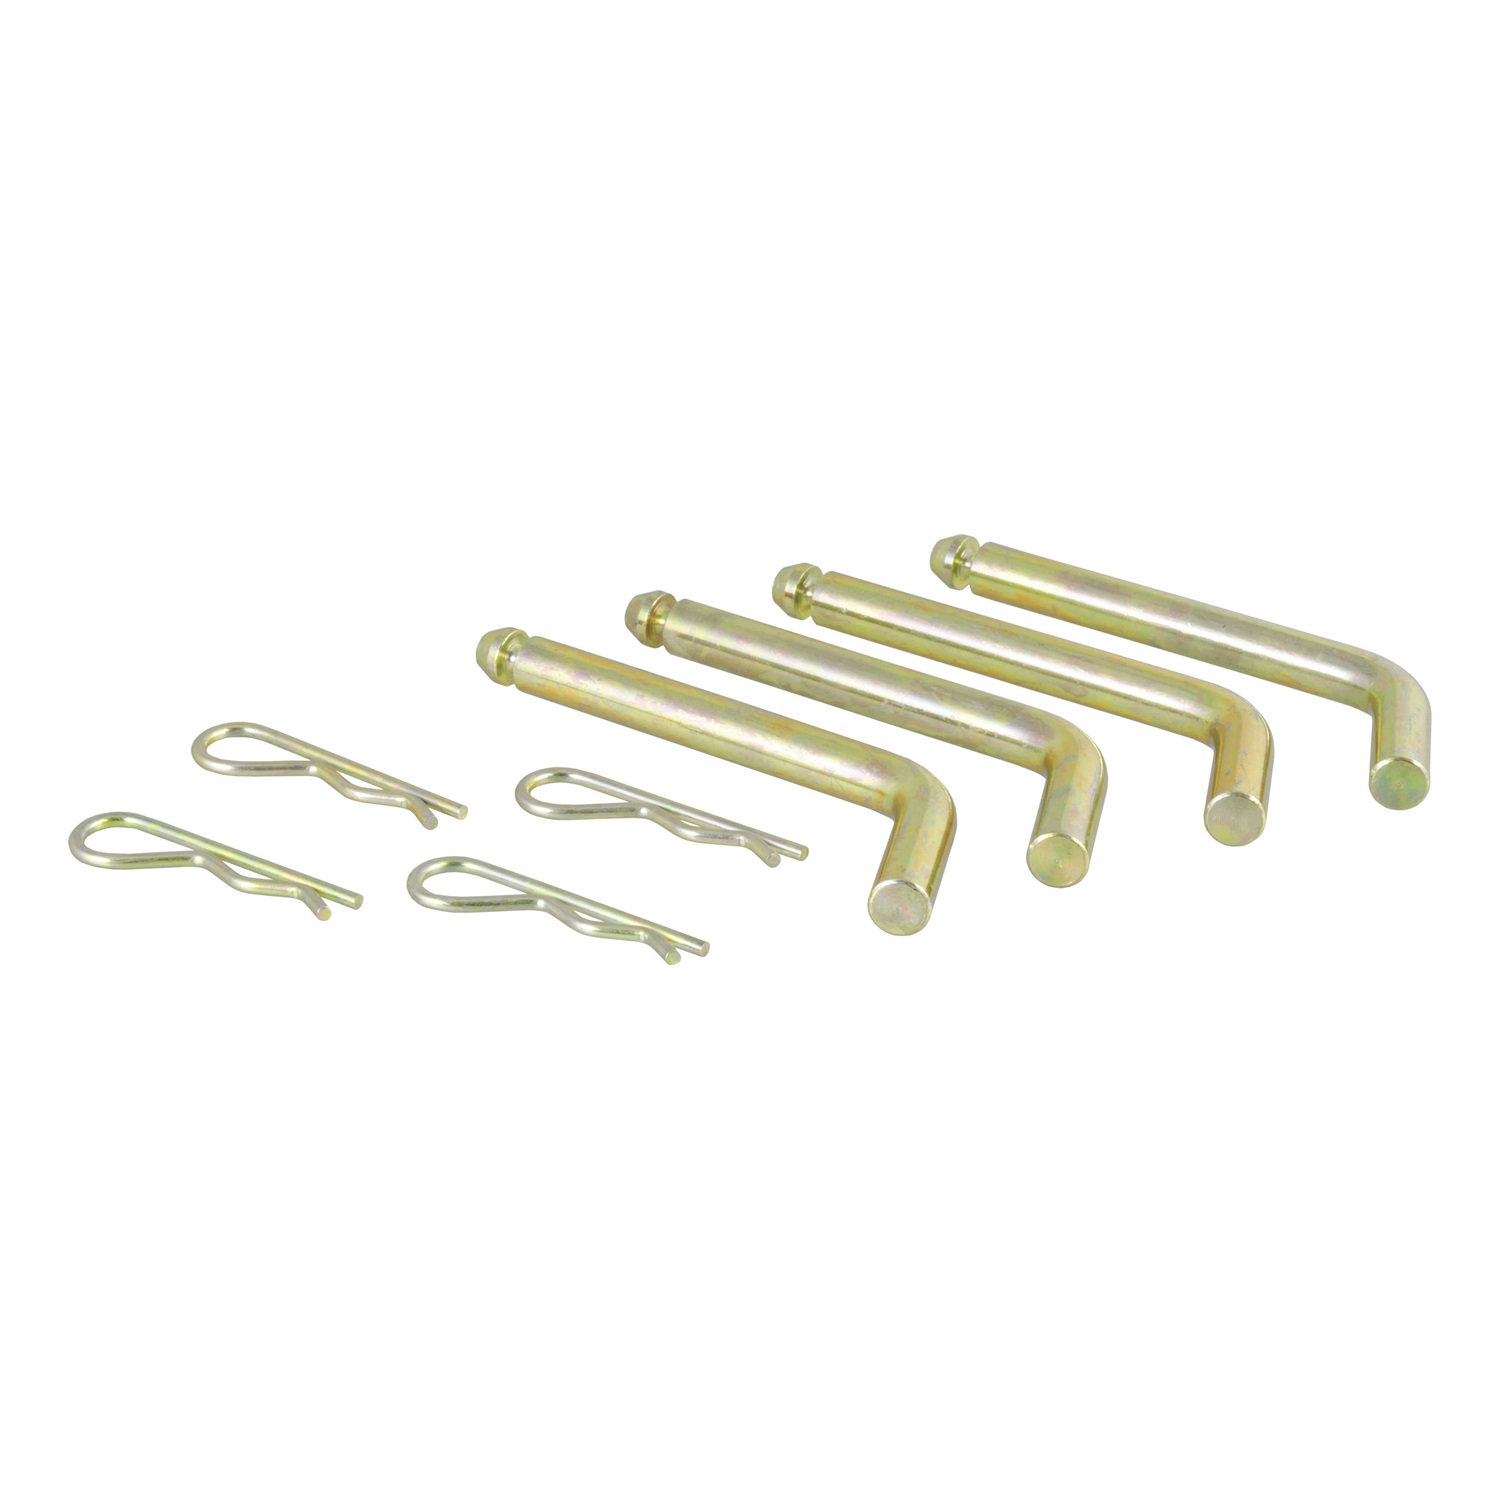 CURT Manufacturing CURT Manufacturing 16902 Fifth Wheel Replacement Pins and Clips  Fits